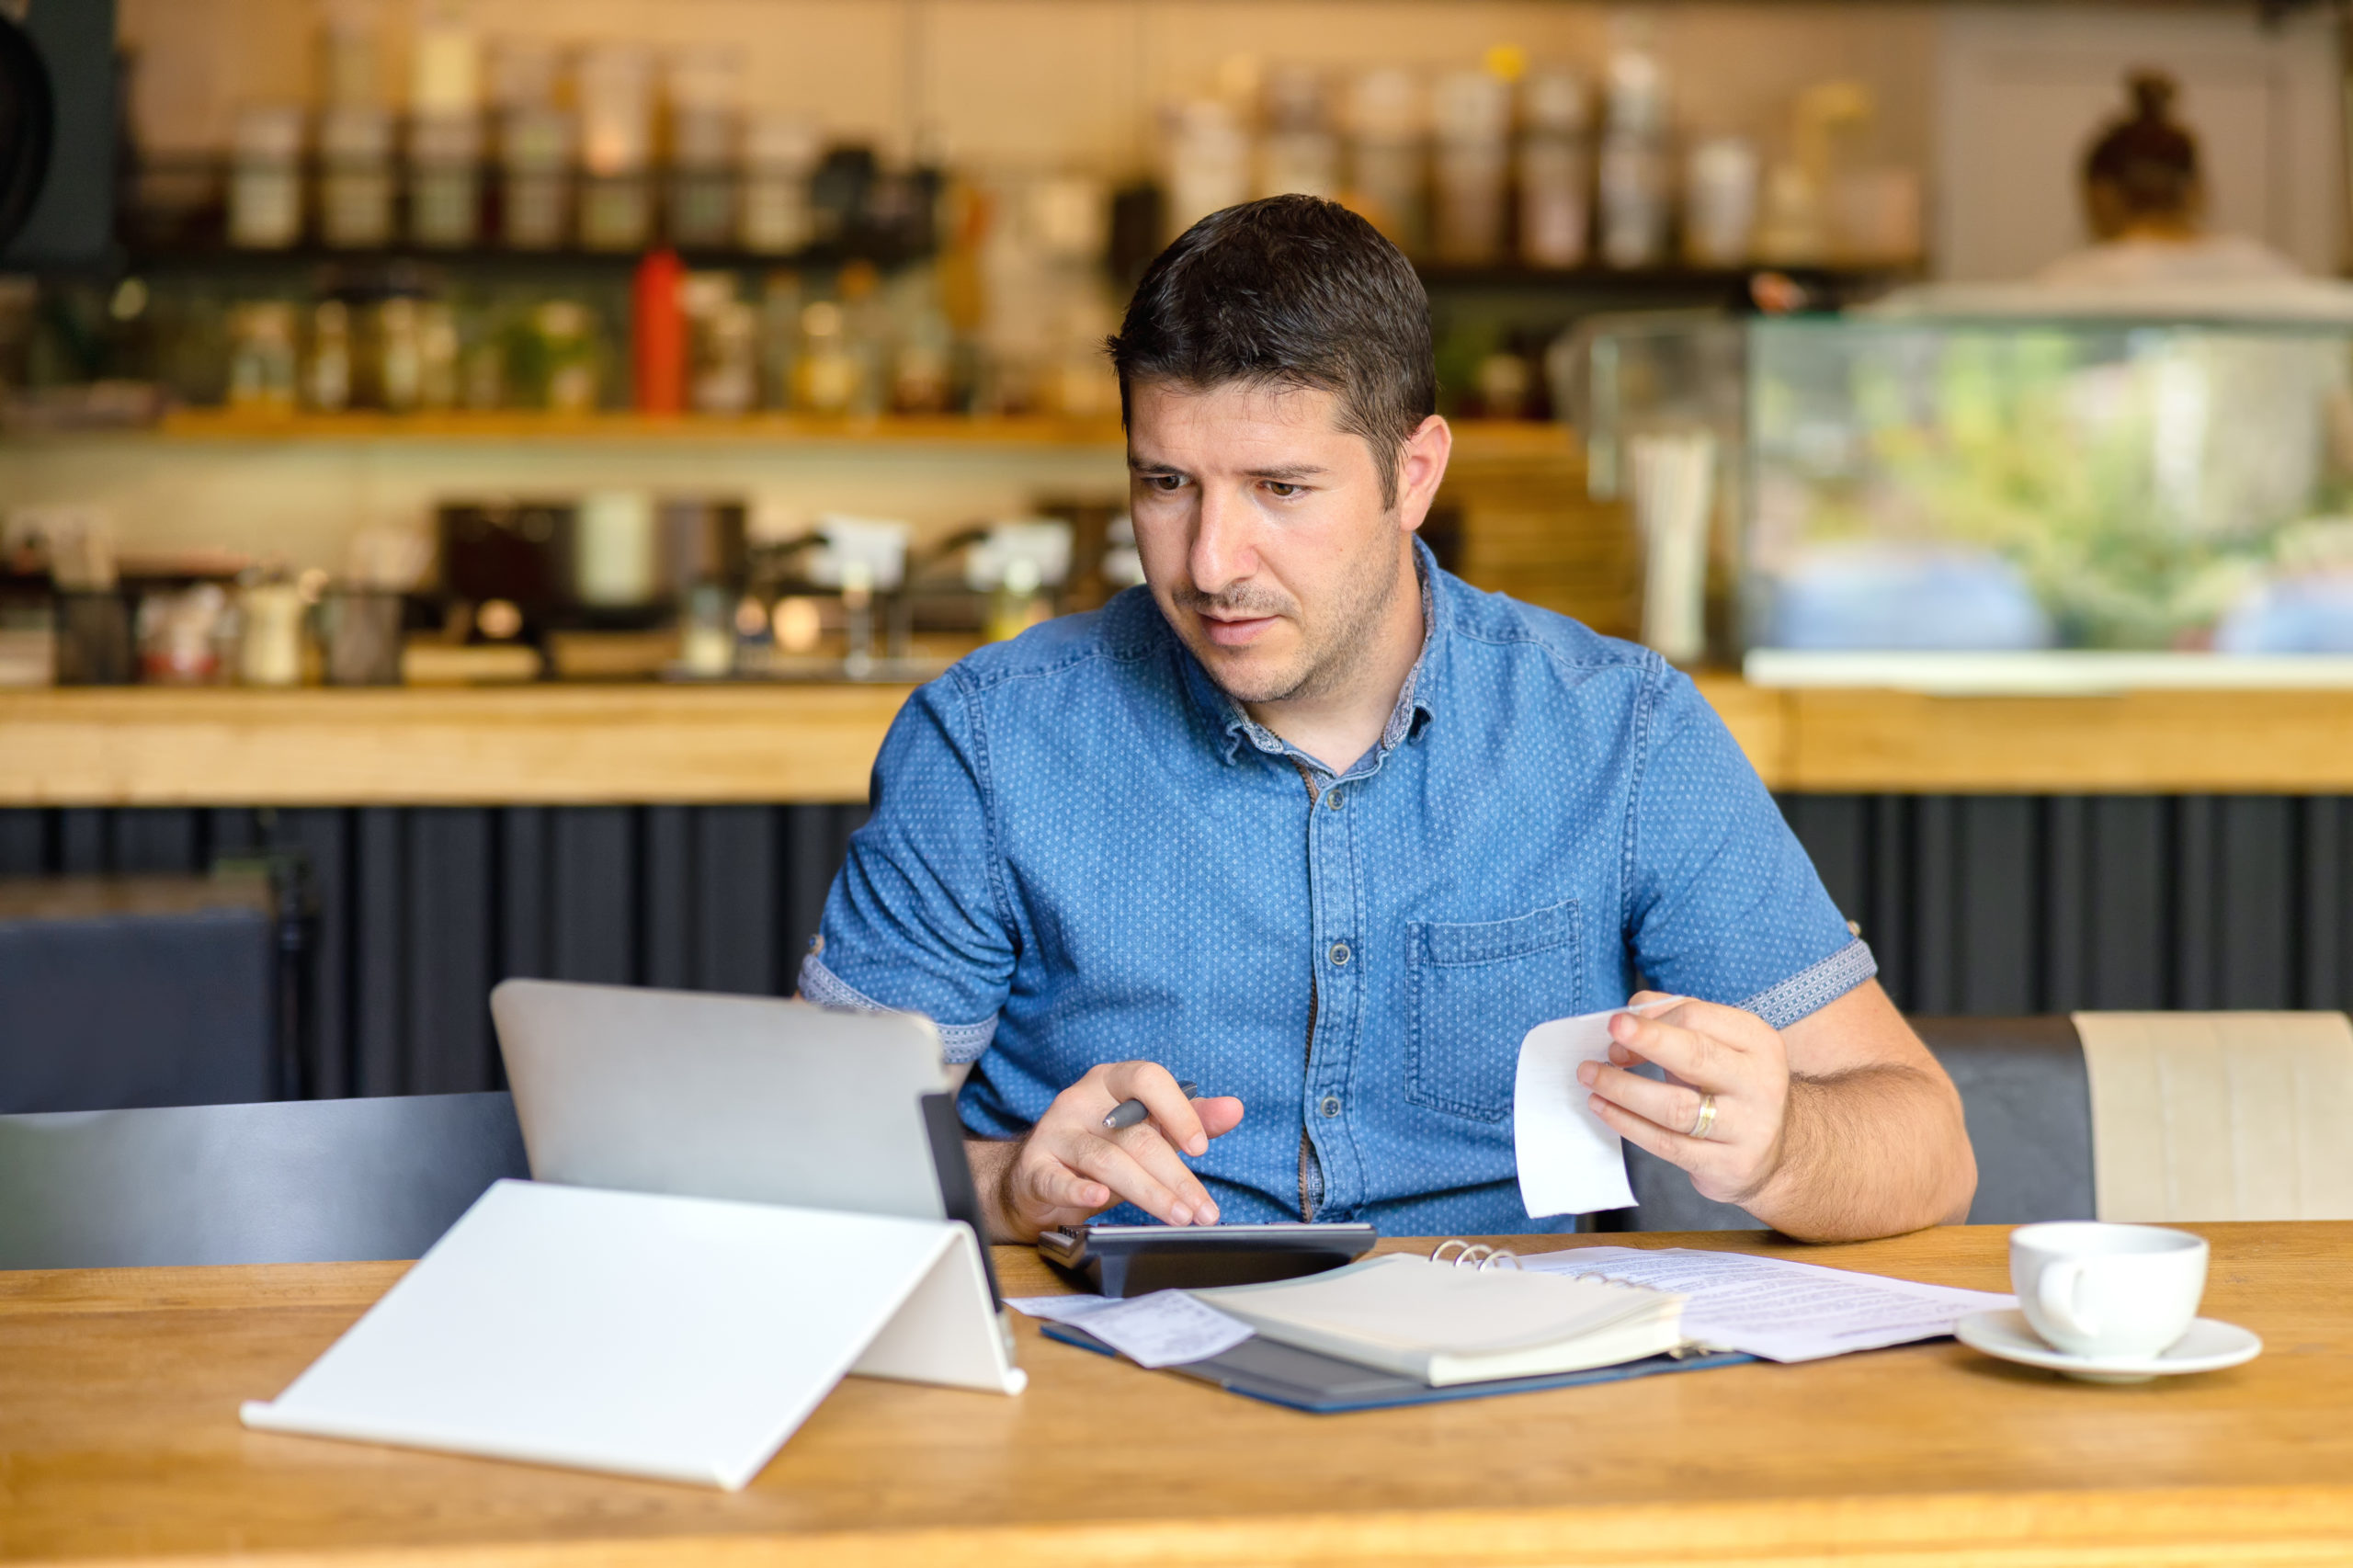 Tracking tax exempt sales - restaurant owner